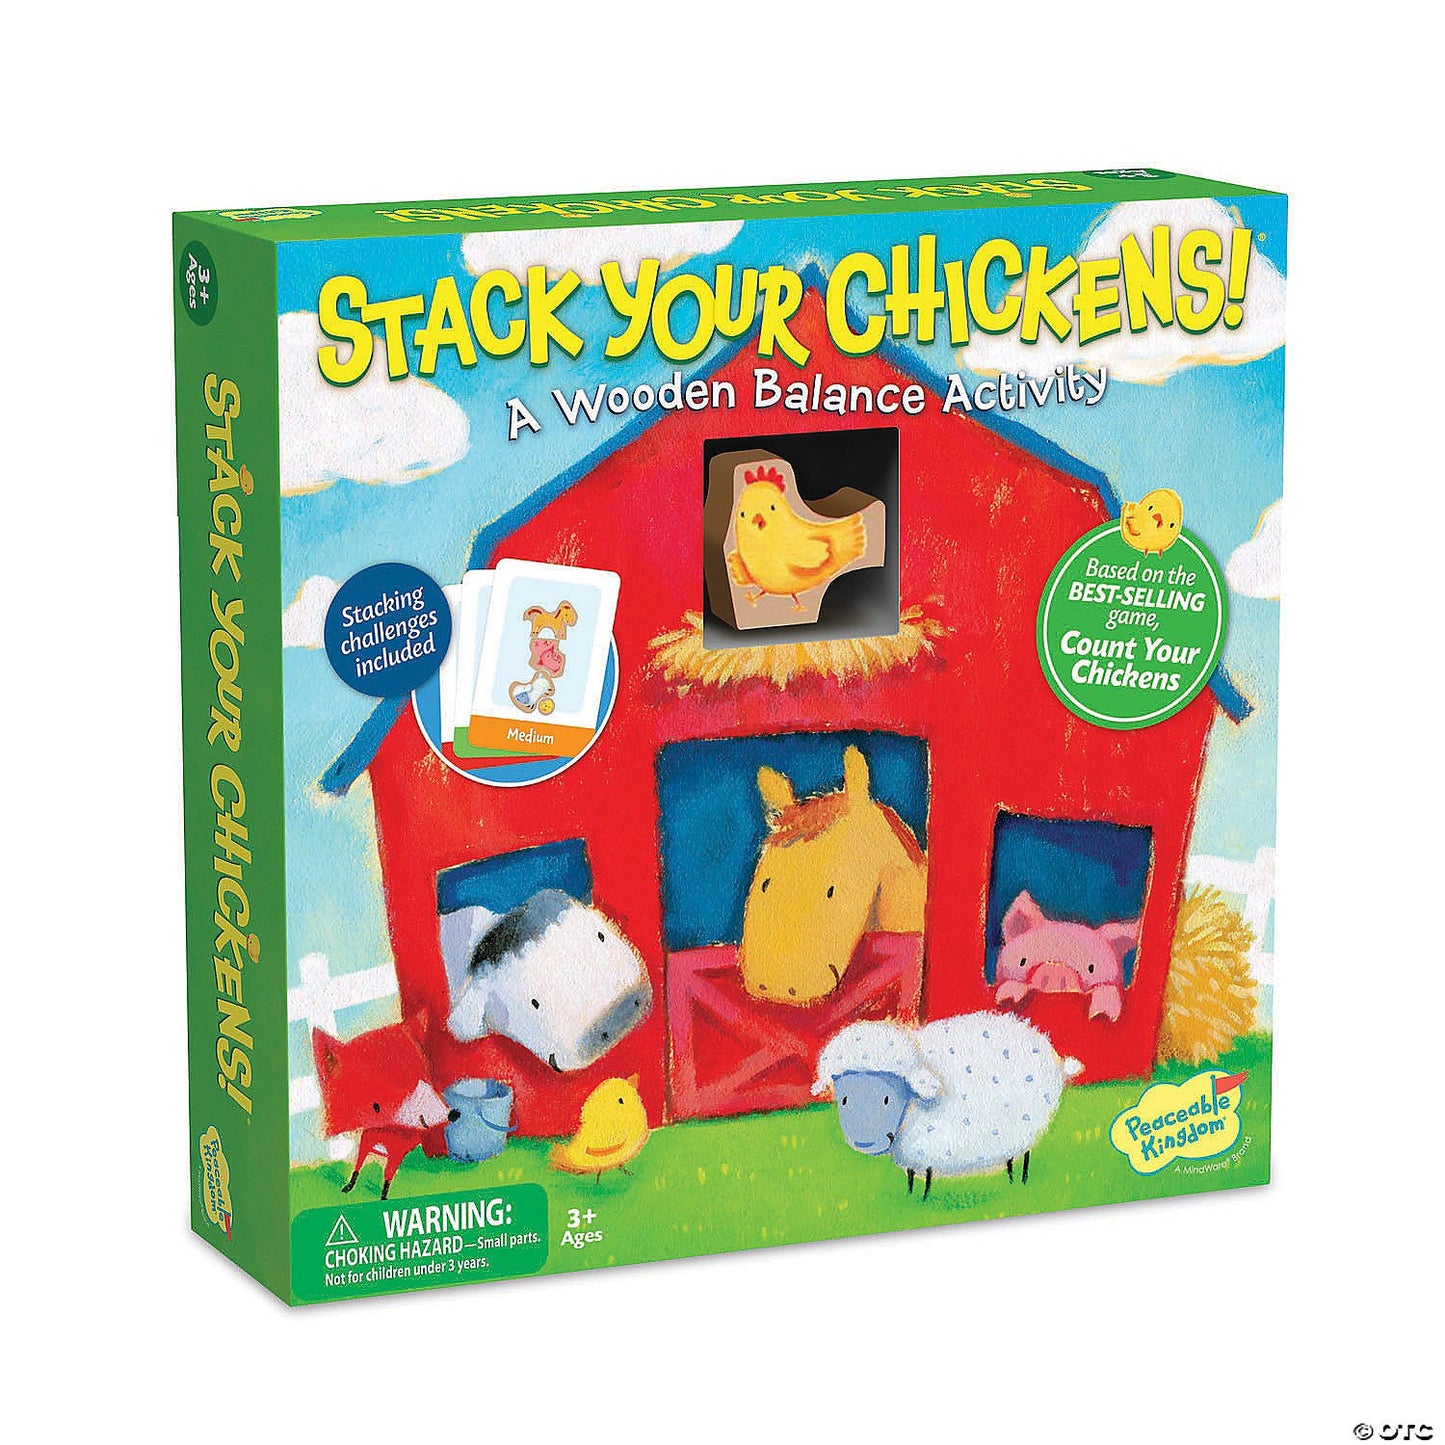 Stack Your Chickens!